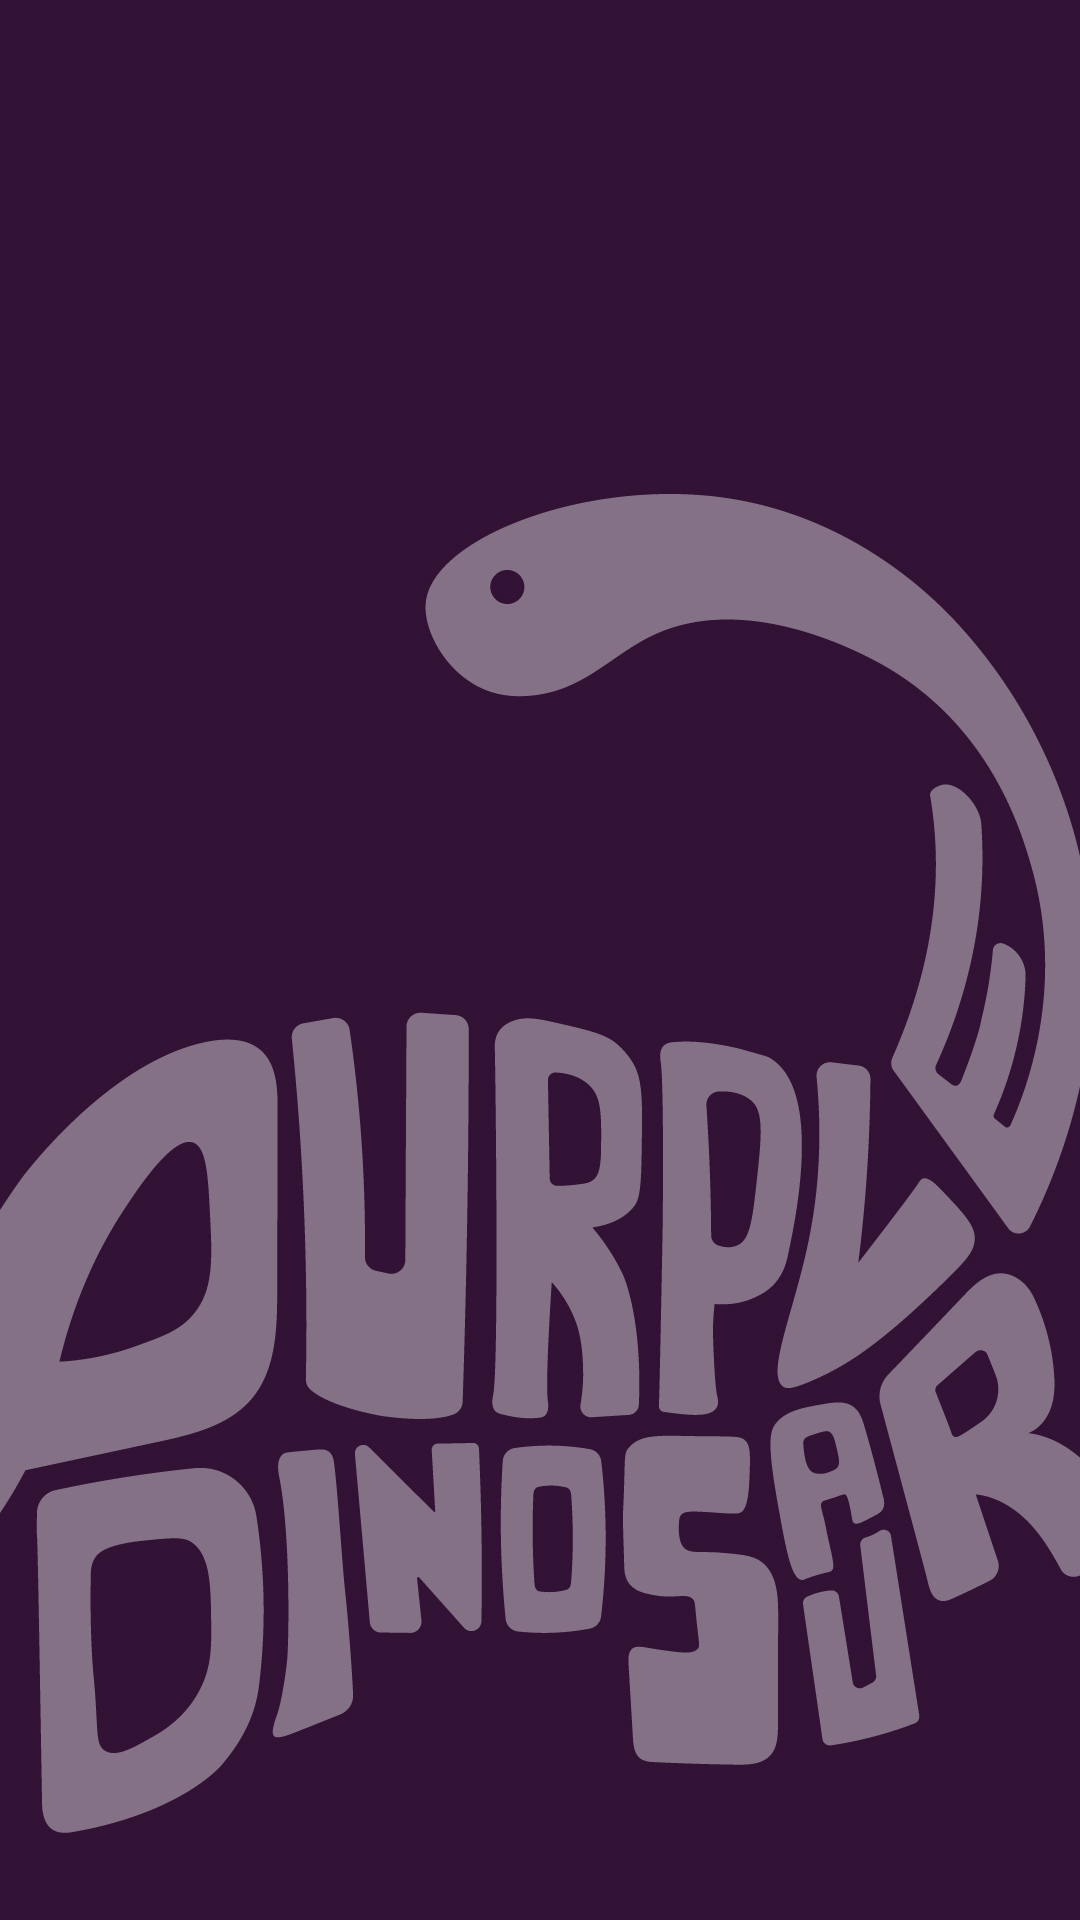 Cute Baby Dinosaur Purple Vector Images over 210